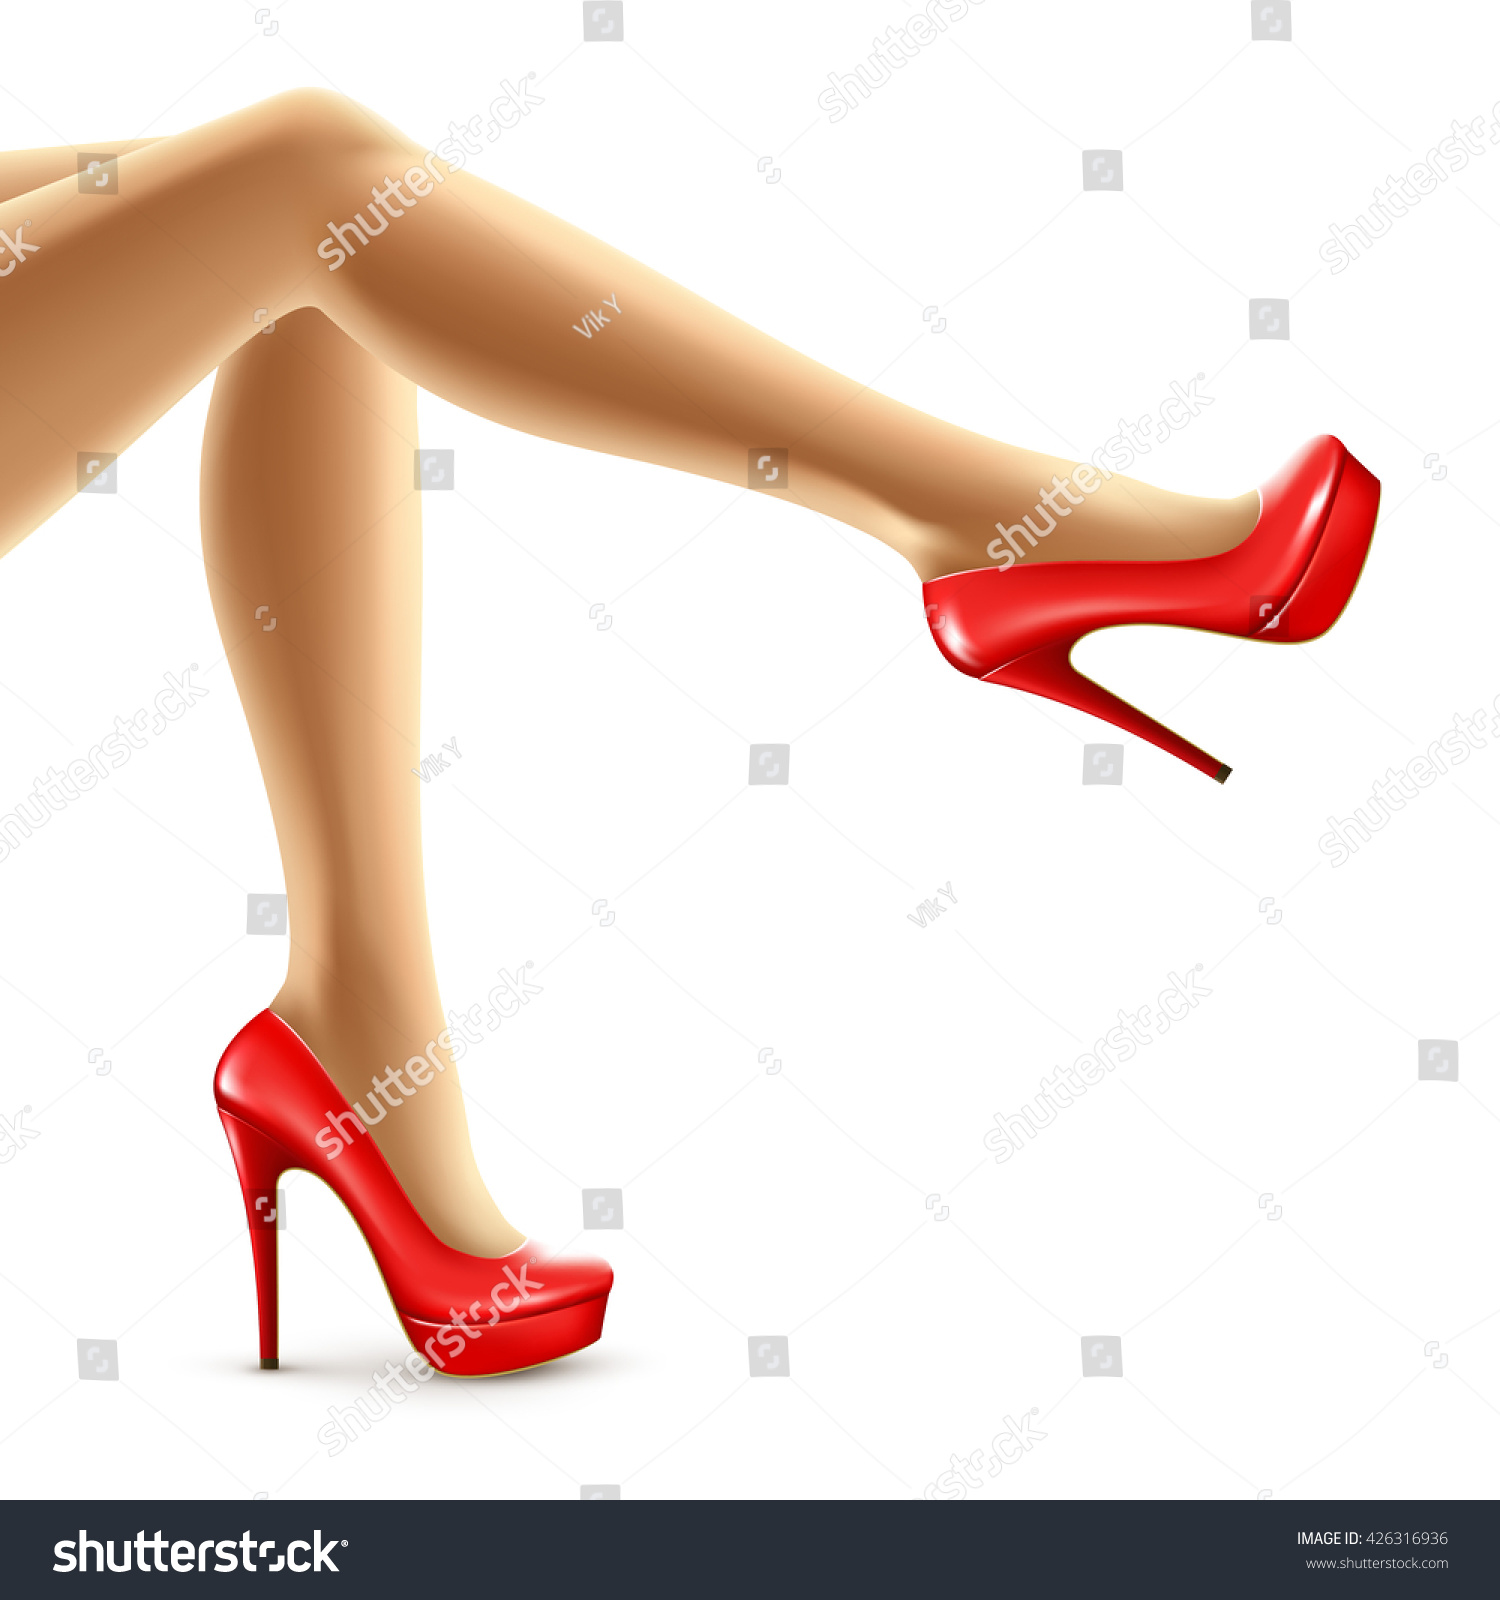 Vector Illustration Female Legs Red Shoes Stock Vector Royalty Free 426316936